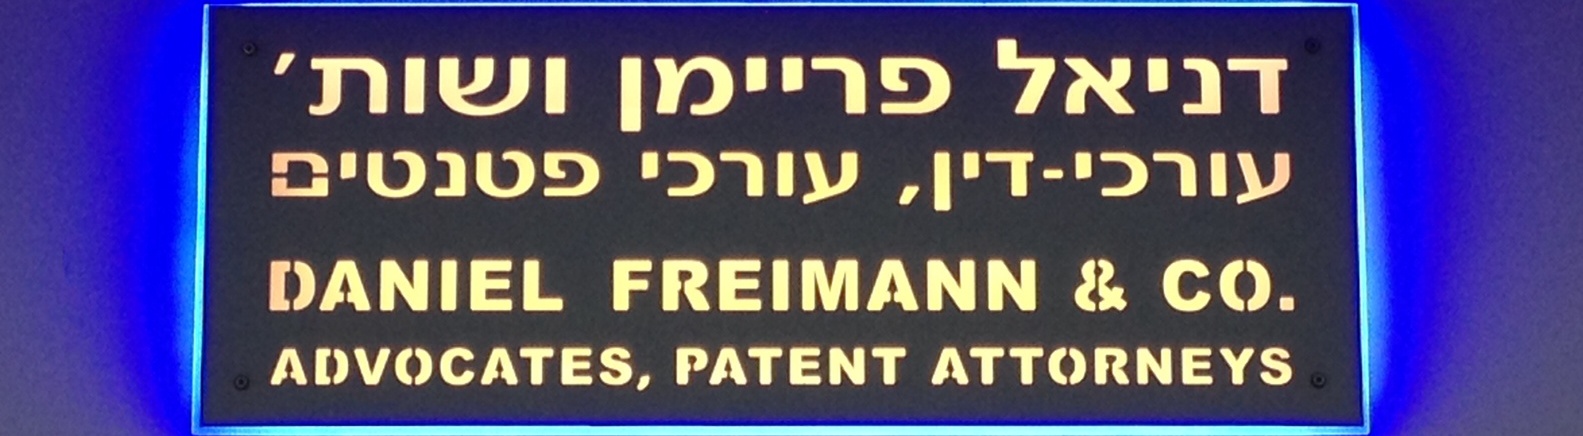 Freimann&co._advocates_and_patent_attorneys1